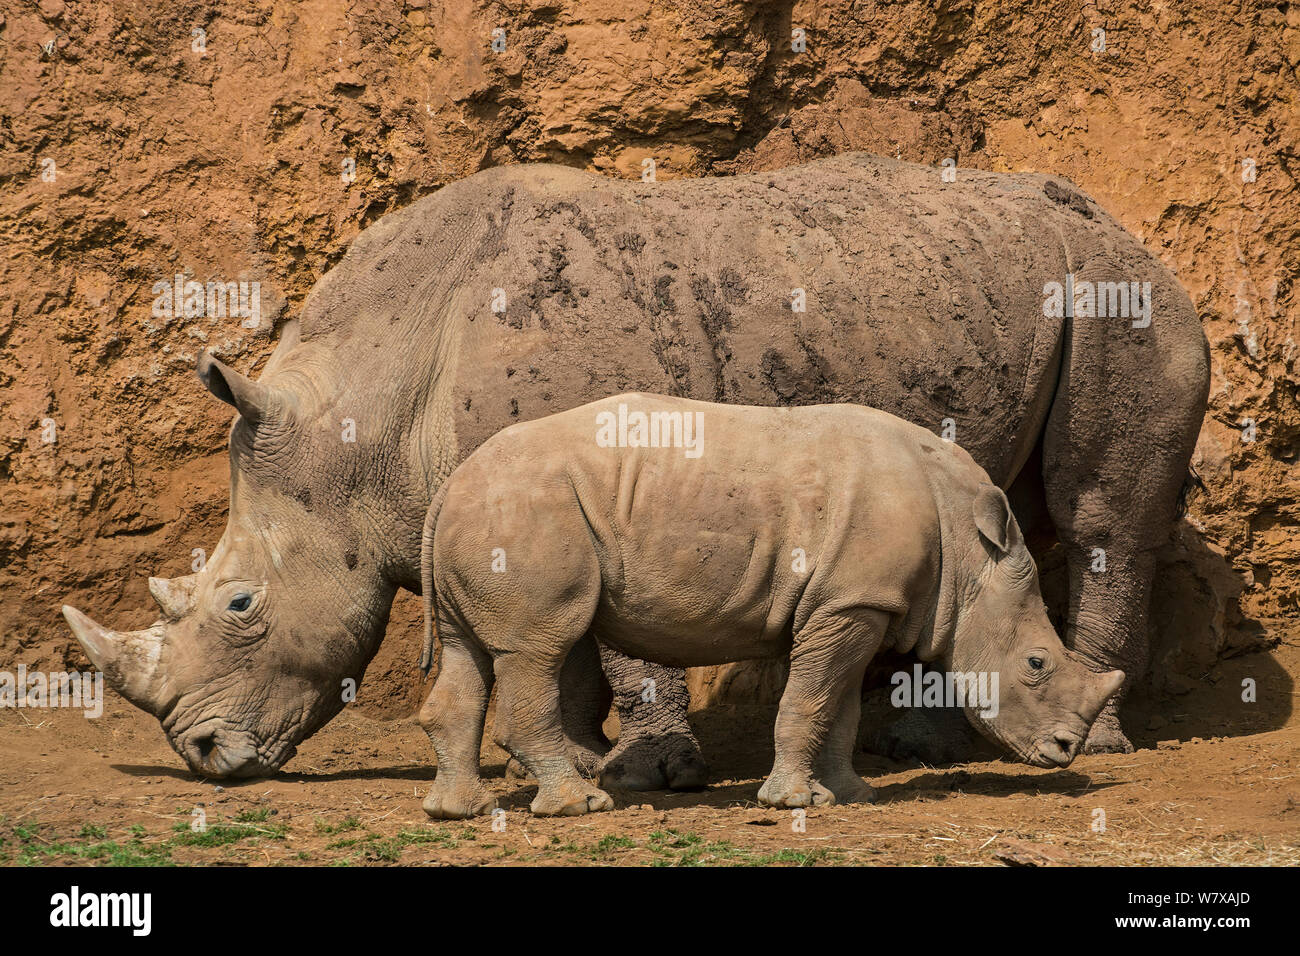 White rhinoceros (Ceratotherium simum) female with calf, Cabarceno Park, Cantabria, Spain. Captive, occurs in southern Africa. Stock Photo